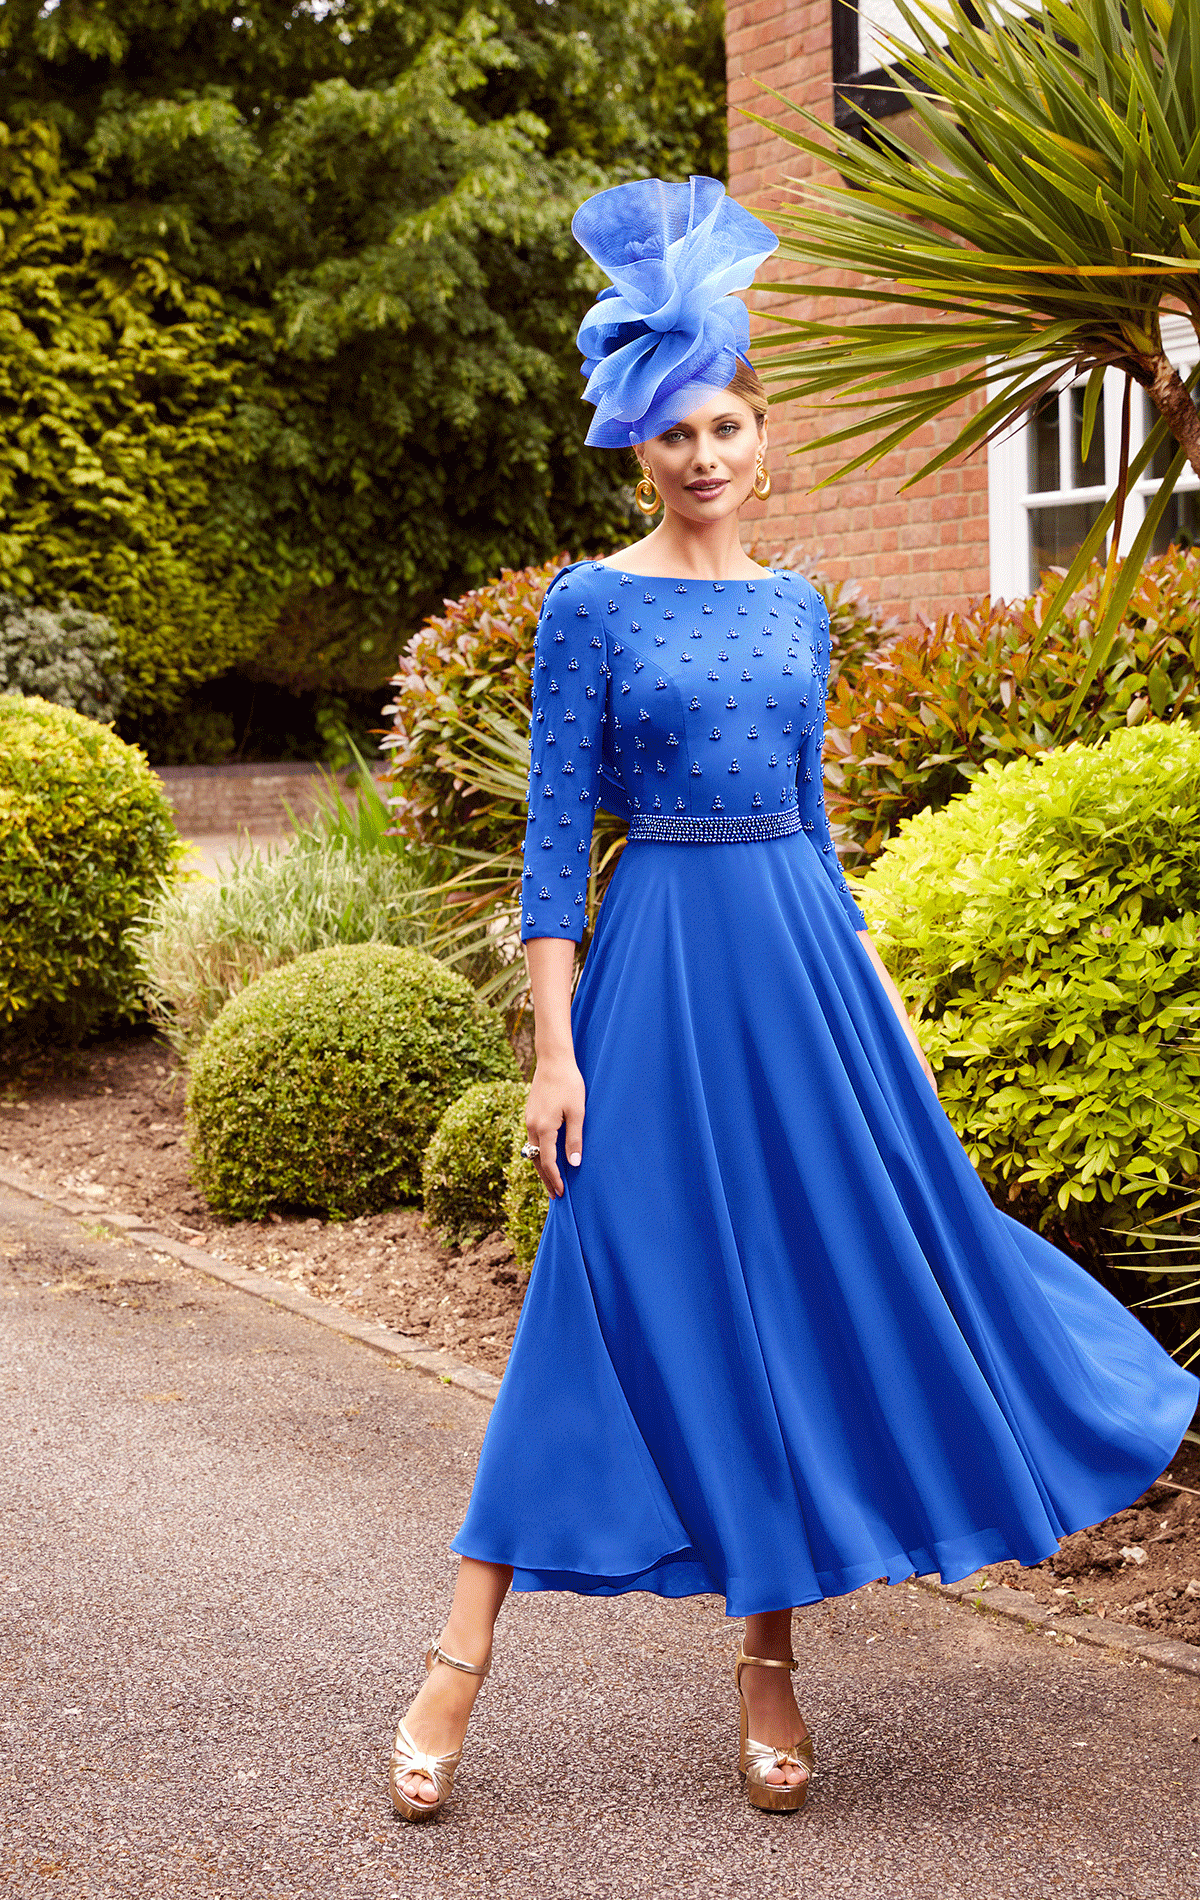 Veni Infantino 29825 - Size 10, 12, 16 - Invitations by Veni Infantino 29825 Royal  Blue  Mother of the bride dress - Brighton's Leading Stockist of Mother of the Bride Outfits  by Veni Infantino - Occasion at Blessings Bridal Loyal Parade, Mill Rise, Westdene, Brighton BN1 5GG T: 01273 505766 E: info@blessingsbridal.co.uk